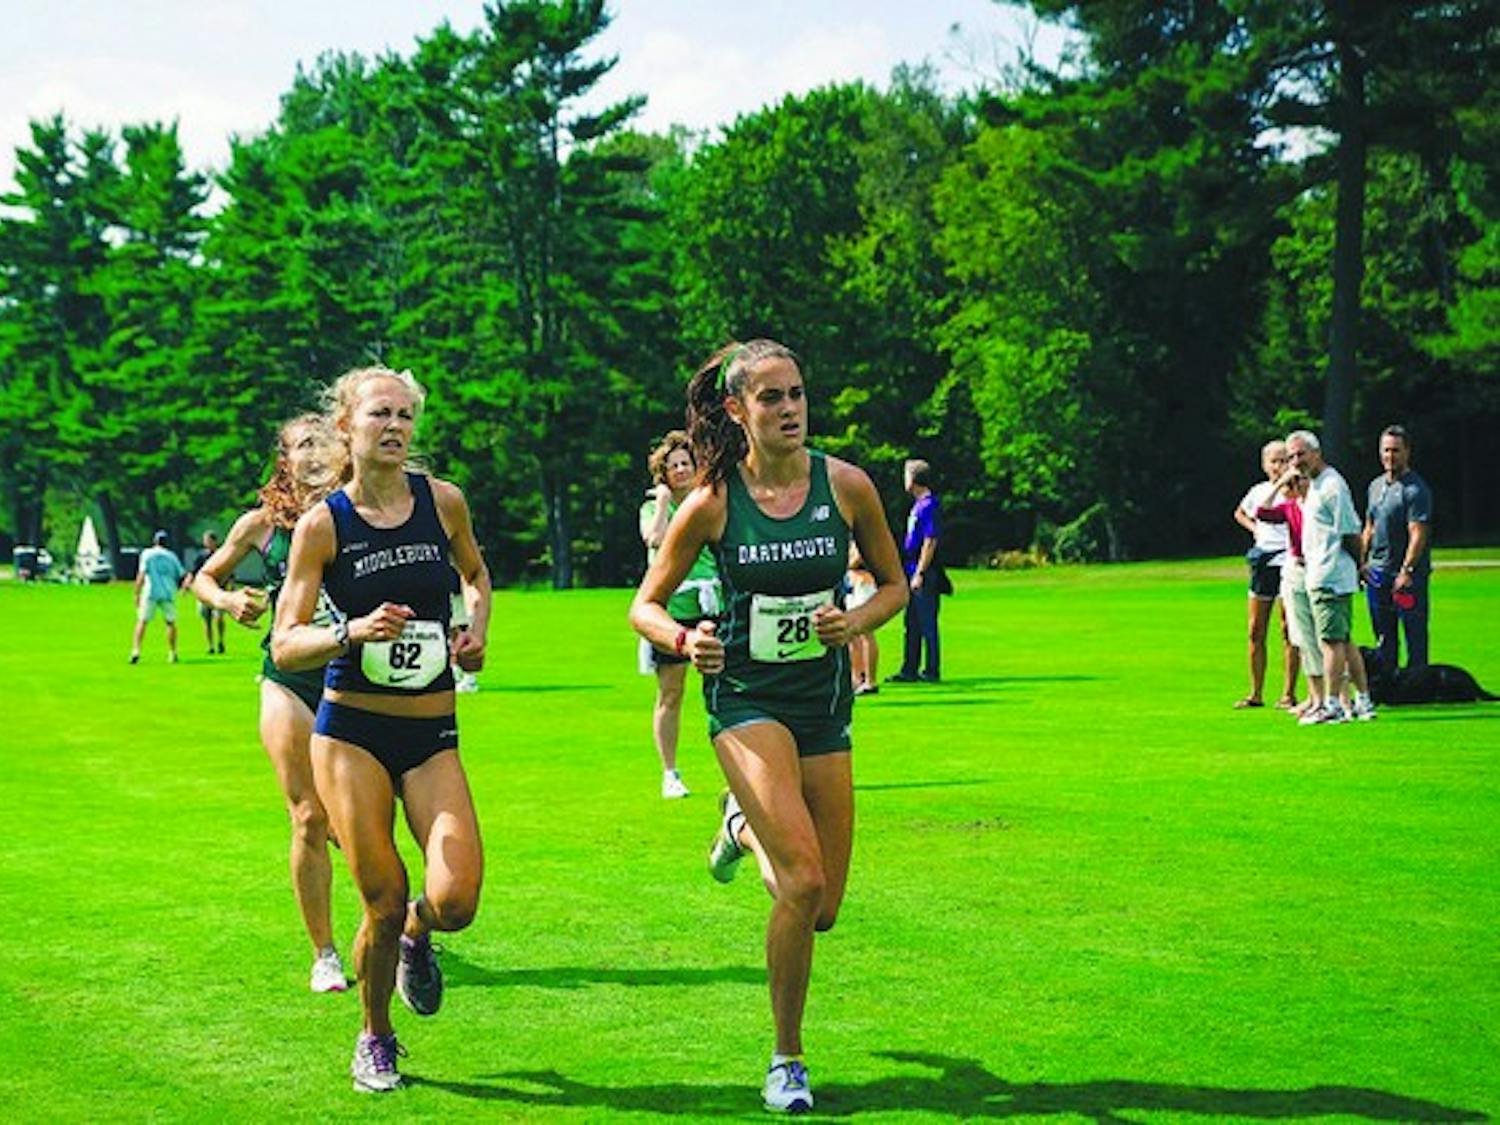 Abby Markowitz '16 strains for the finish line at Saturday's Dartmouth Invitational, at which she finished 53rd overall.